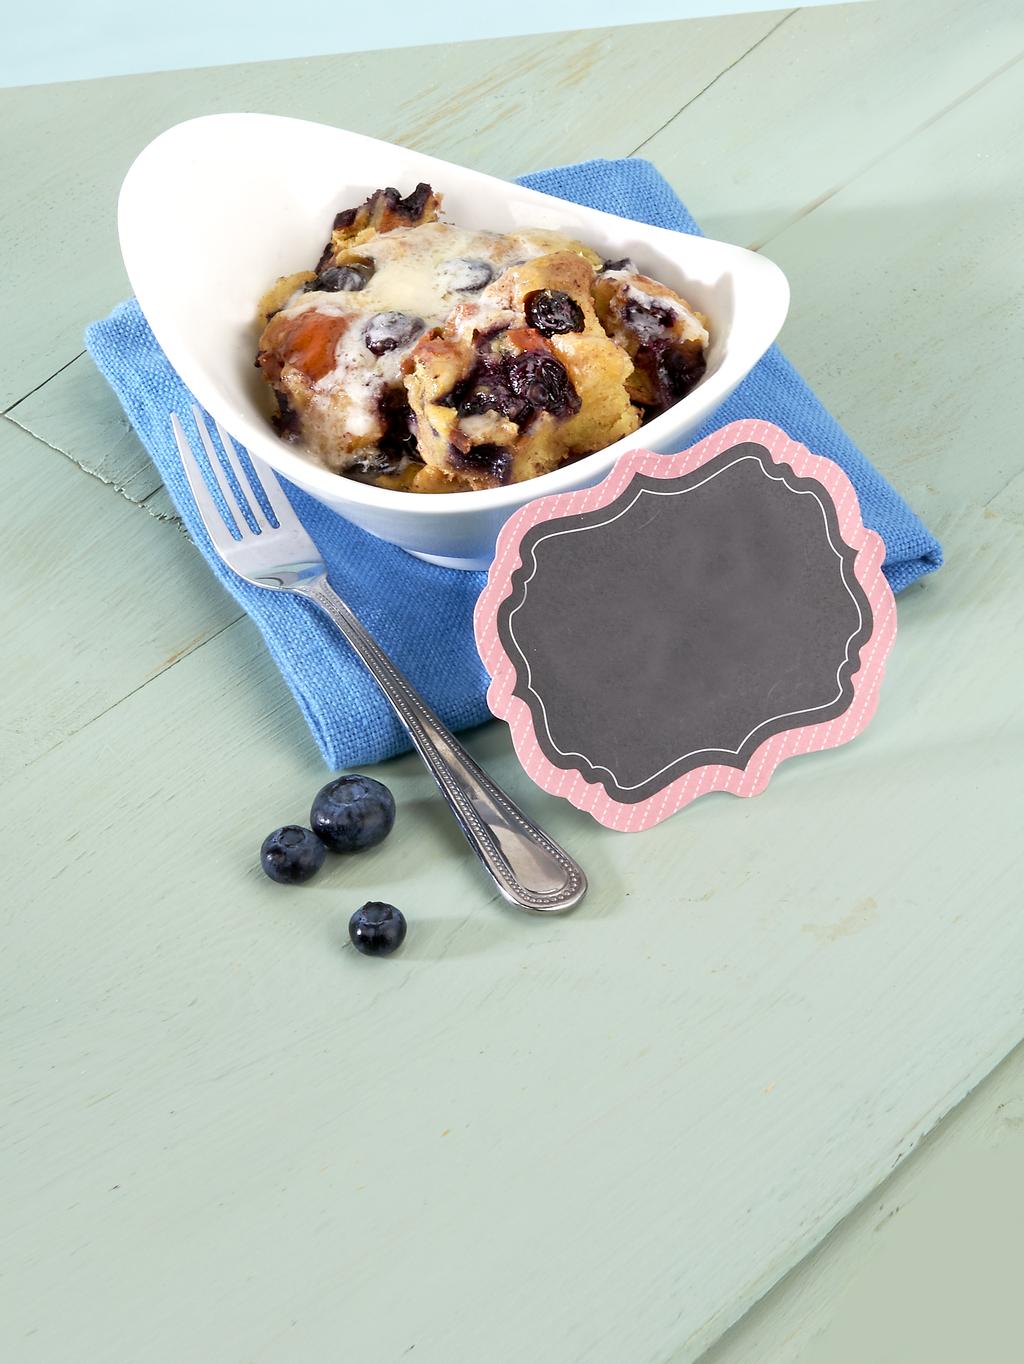 y r r e b e Blu read B ding Pud pudding 3 cups blueberries, washed, drained and dried 2 large eggs, slightly beaten 2 cups whole milk 6 tbsp butter 1/2 cup Domino Granulated Sugar 2 tsp vanilla